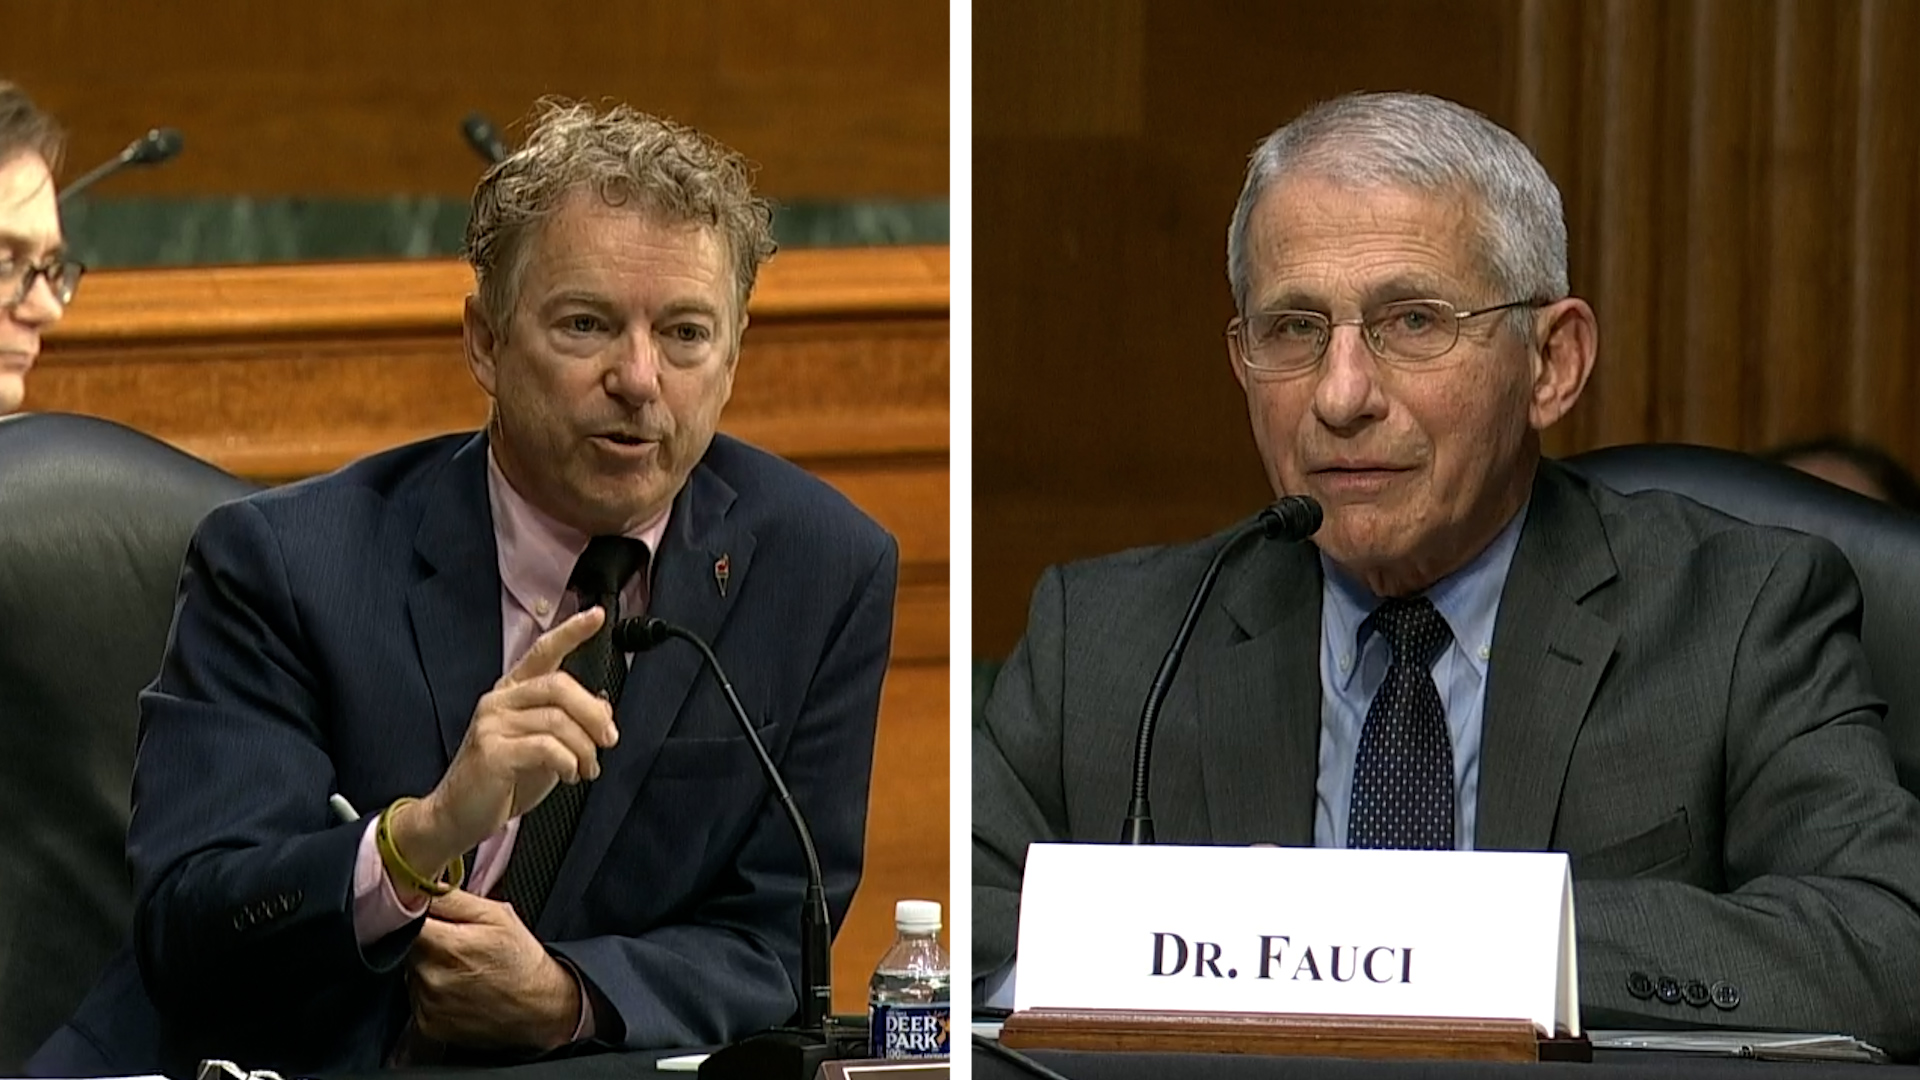 New Documents Prove Fauci Lied about Gain of Function